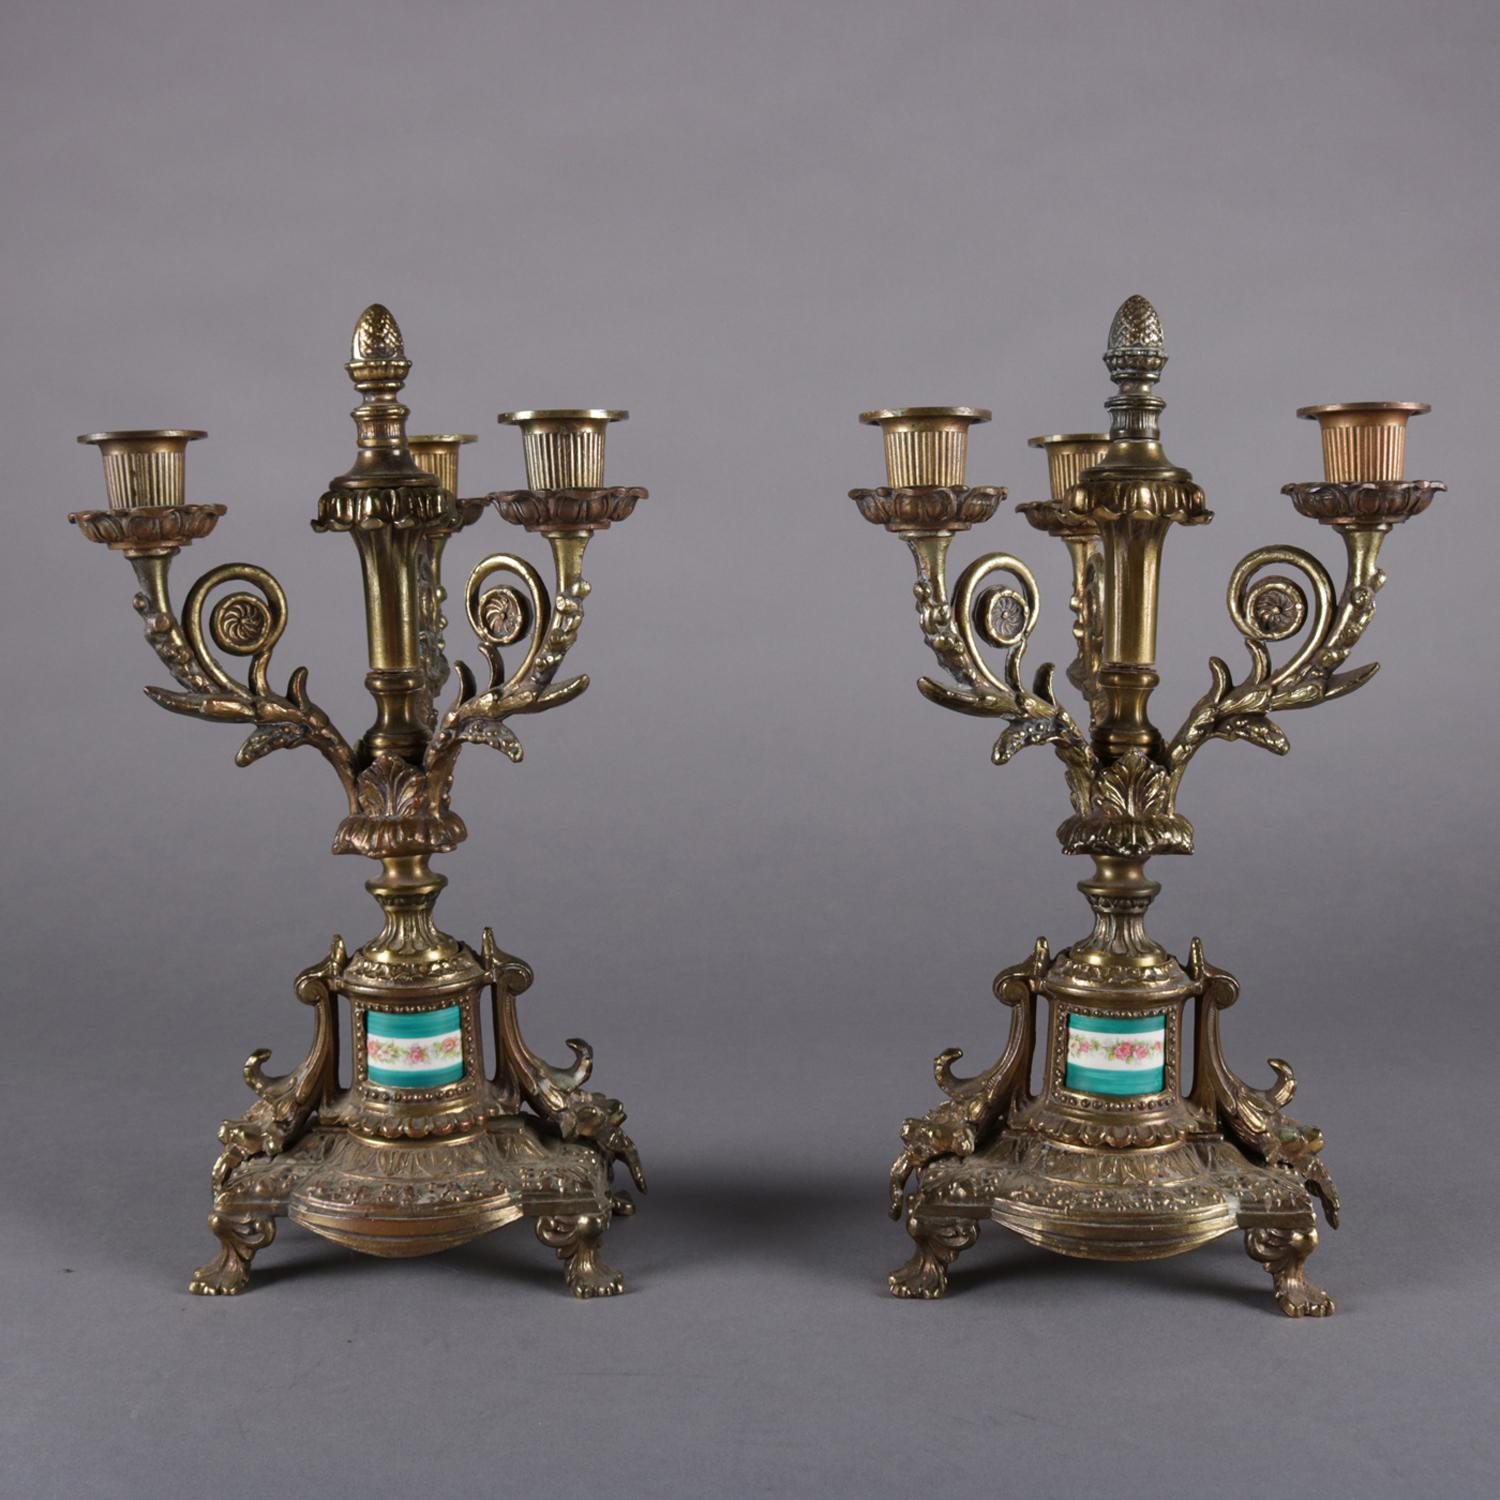 Pair of antique French Louis XIV style candelabra features bronzed base with Sevres school painted porcelain cylindrical insert below three scroll and foliate form arms terminating in candle sockets and surrounding central pineapple finial, circa